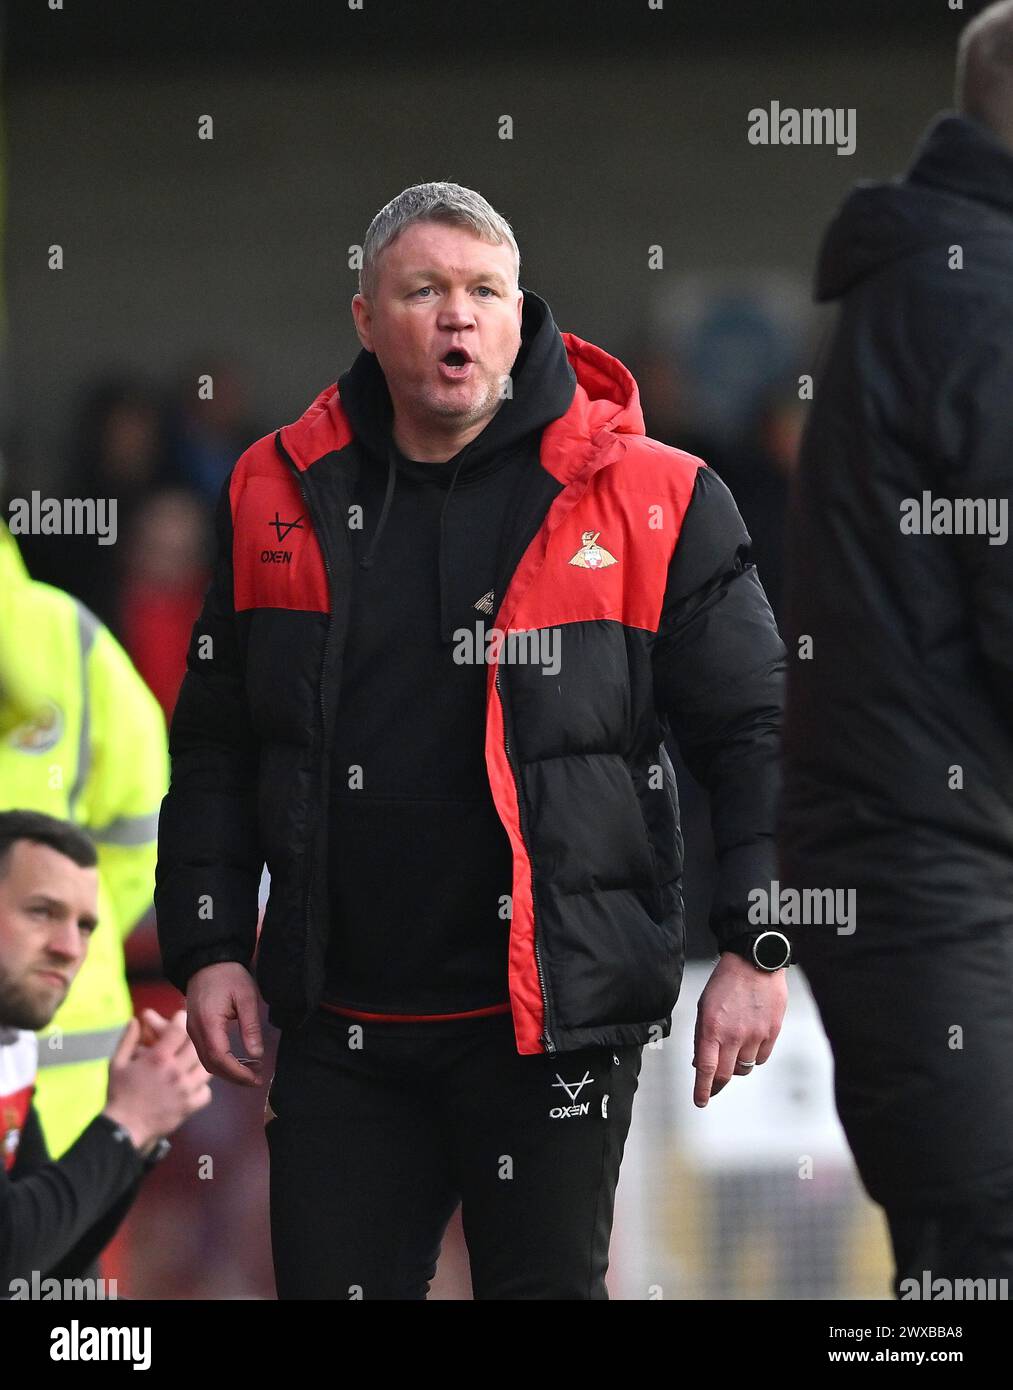 Crawley UK 29th March 2024 - Doncaster manager Grant McCann during the EFL League Two match between Crawley Town and Doncaster Rovers  : Credit Simon Dack / TPI / Alamy Live News. Editorial use only. No merchandising. For Football images FA and Premier League restrictions apply inc. no internet/mobile usage without FAPL license - for details contact Football Dataco Stock Photo